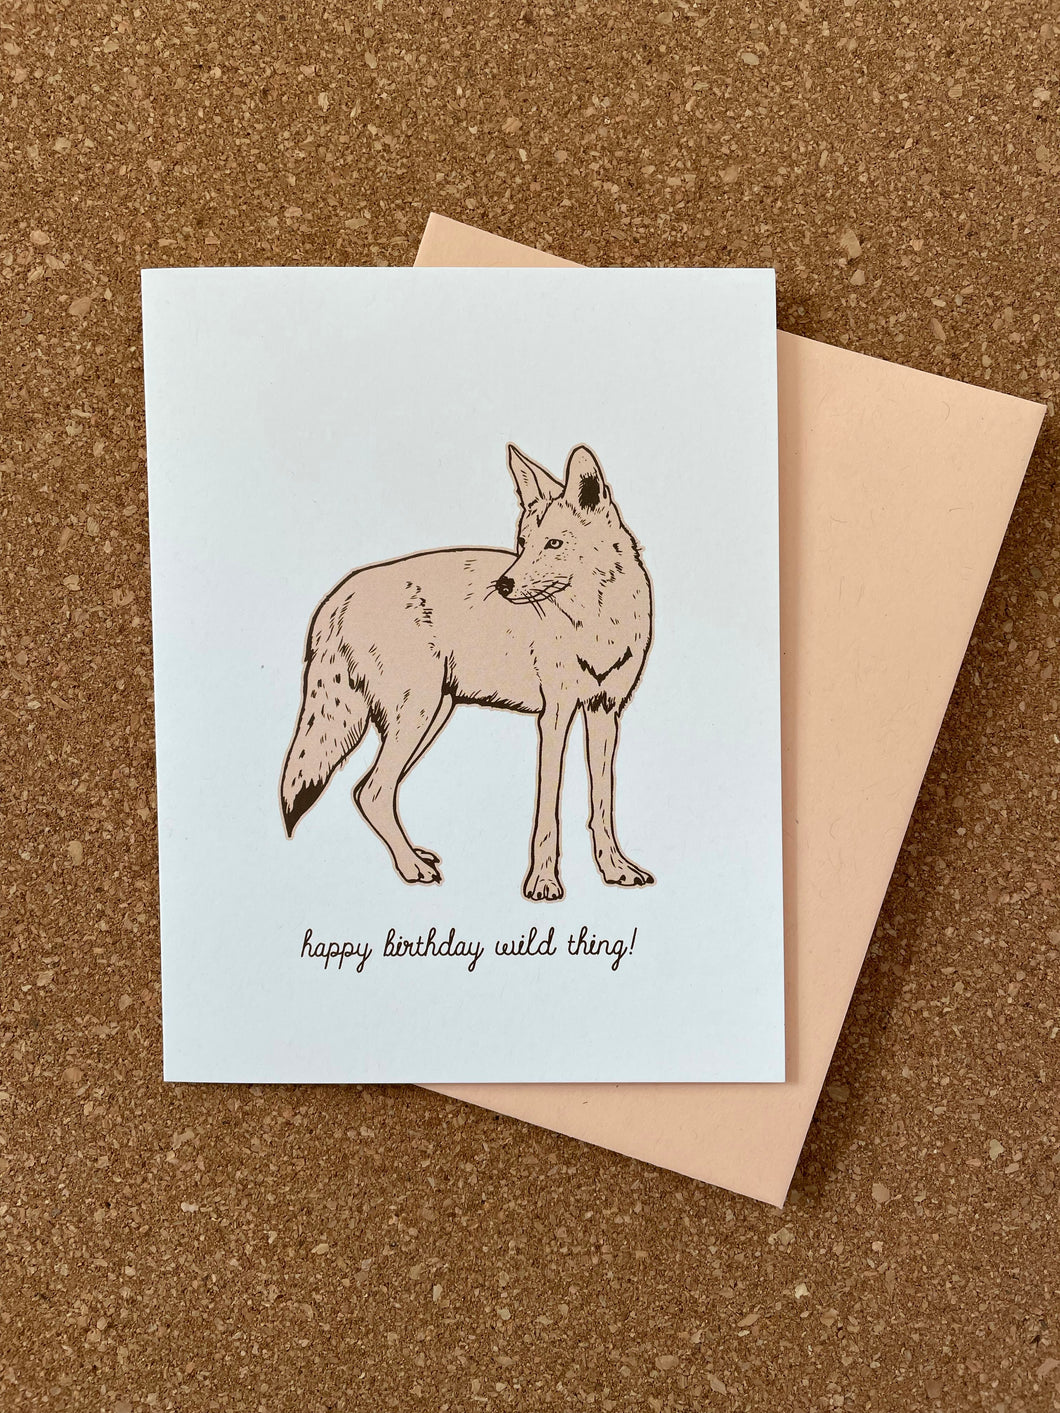 Coyote Greeting Card - happy birthday wild thing!